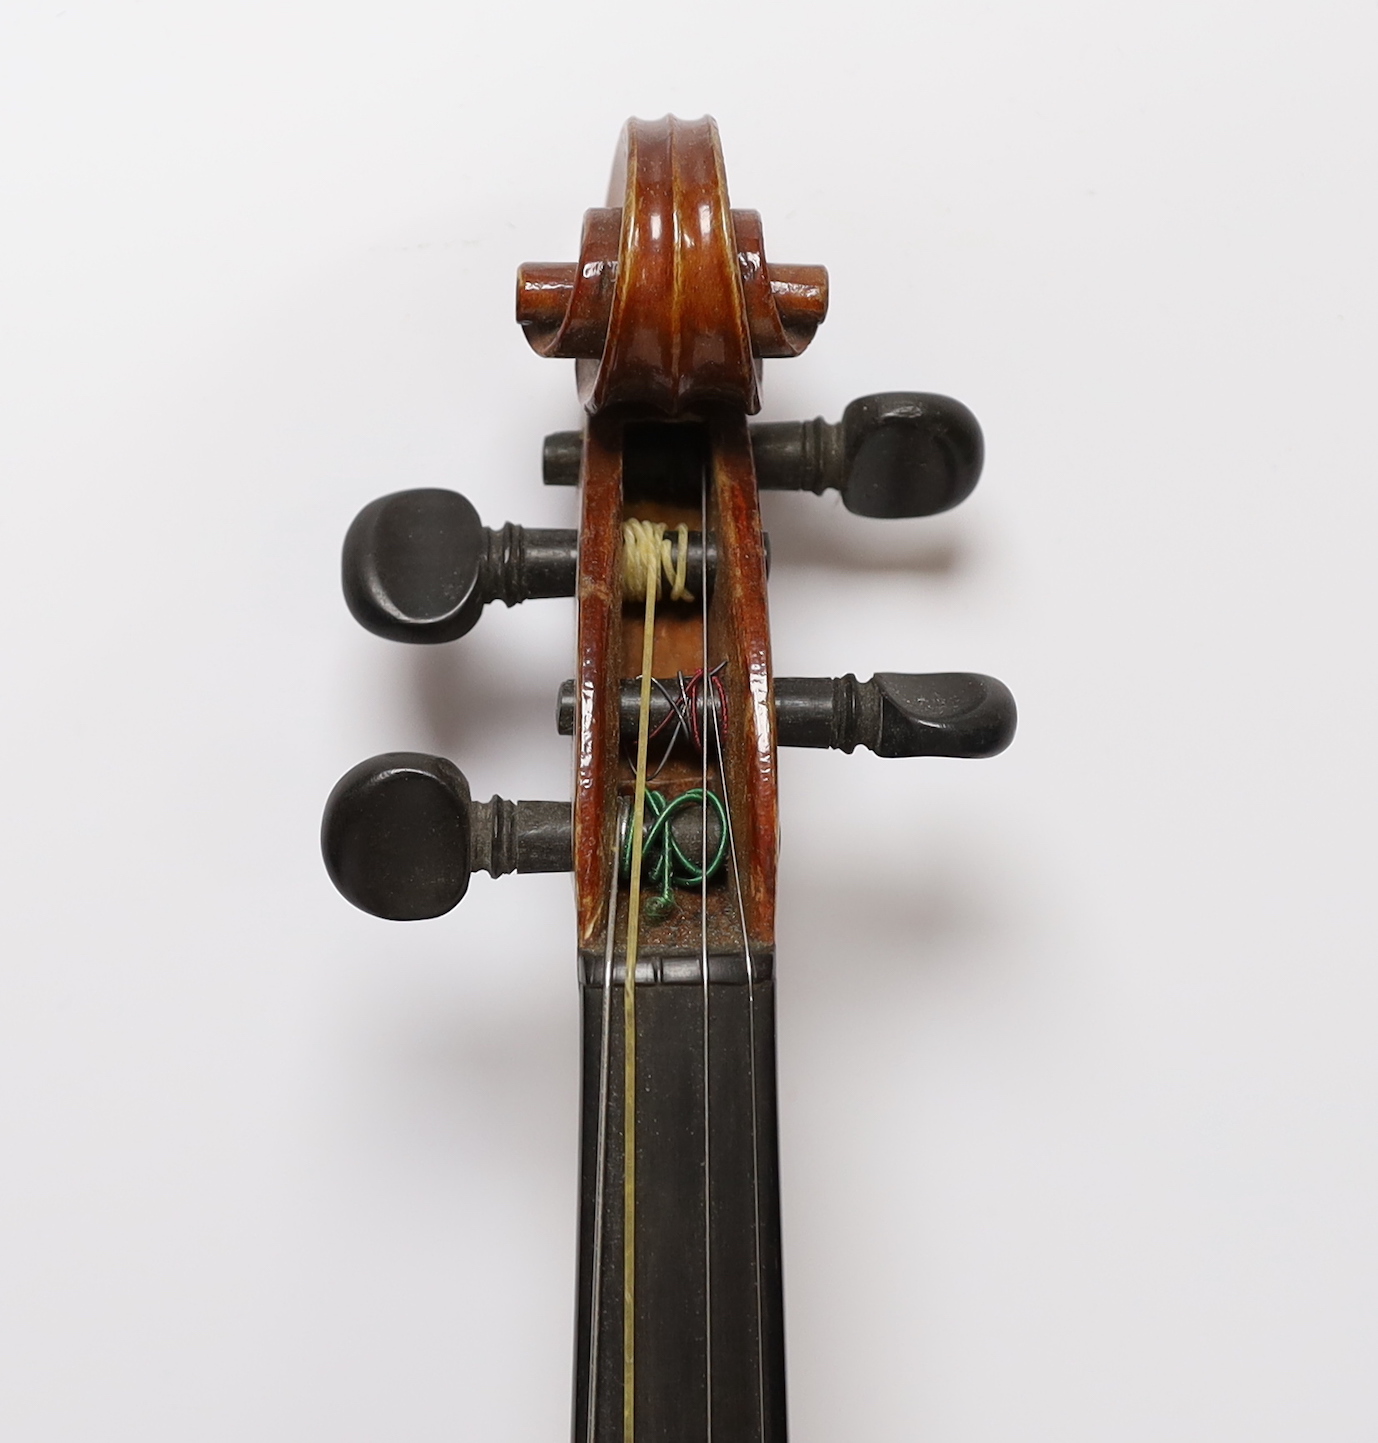 A cased 3/4 sized student violin marked Dresden, with reproduction Stradivarius label